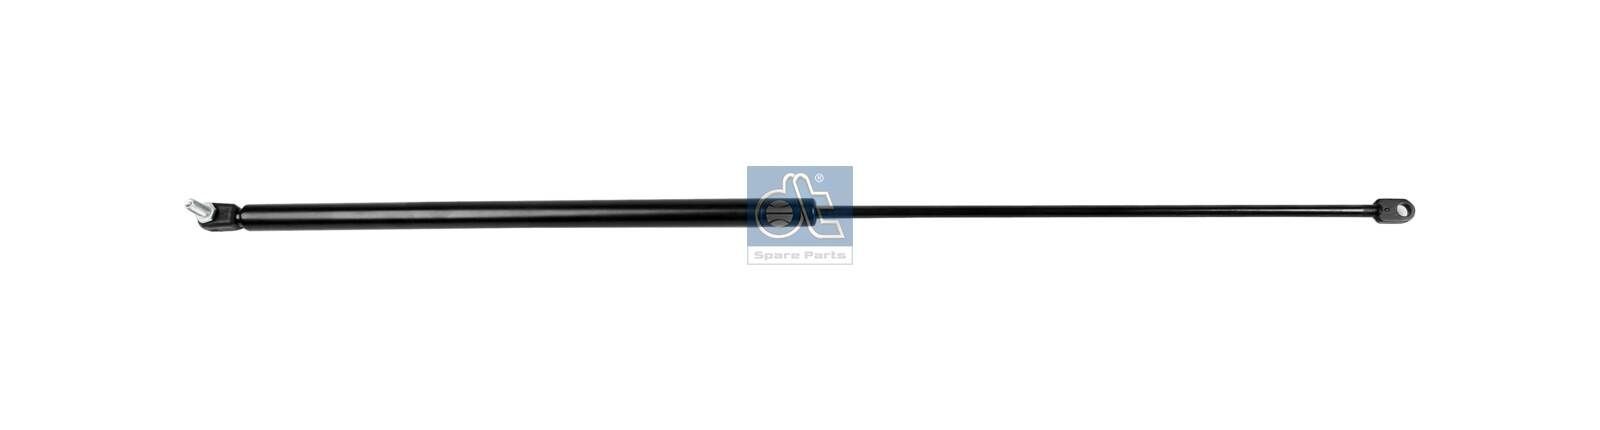 2326BZ DT Spare Parts 520N, 750 mm Stroke: 340mm Gas spring, boot- / cargo area 4.67611 buy